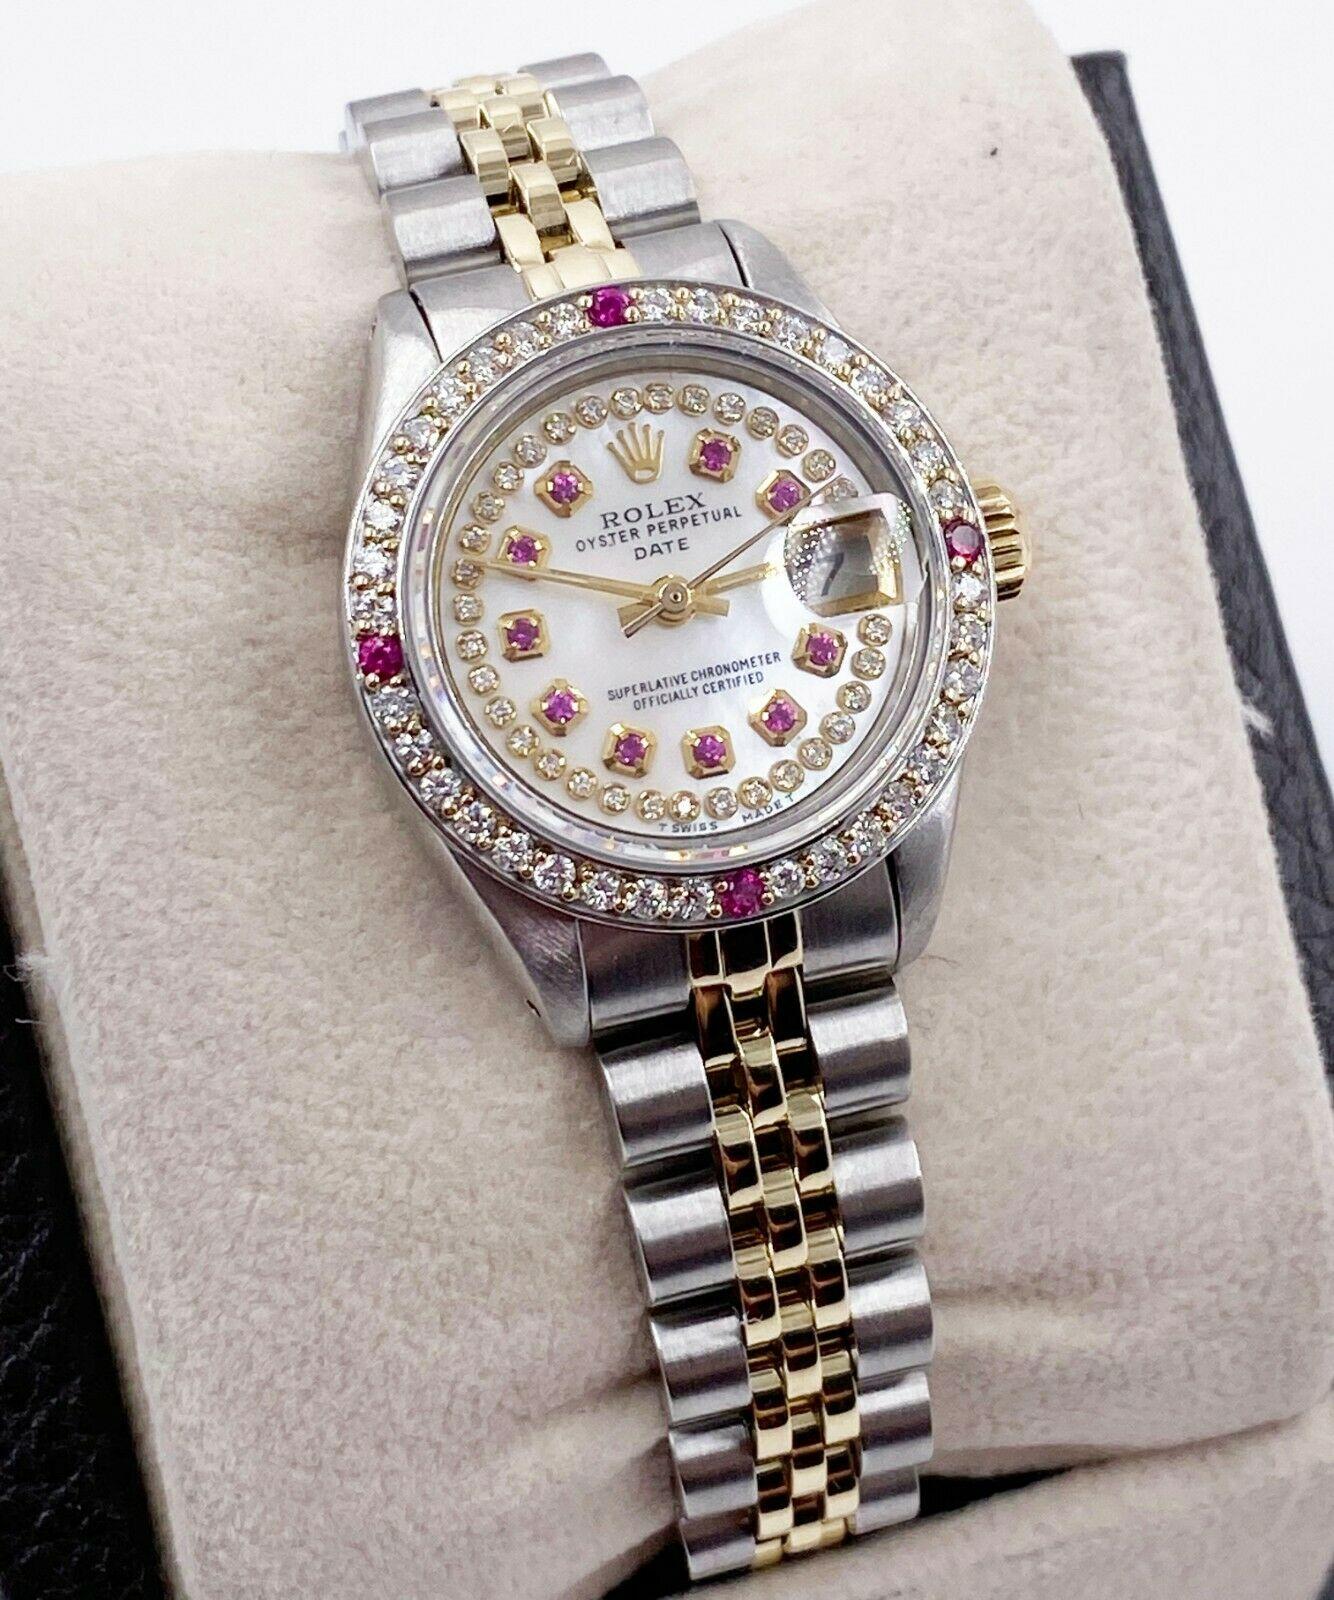 Style Number: 6917

 

Serial: 7044***

 

Model: Ladies Date

 

Case Material: Stainless Steel 

 

Band: 14K Yellow Gold and Stainless Steel 

 

Bezel: Custom Diamond and Ruby 

 

Dial: Custom Diamond and Ruby 

 

Face: Sapphire Crystal 

